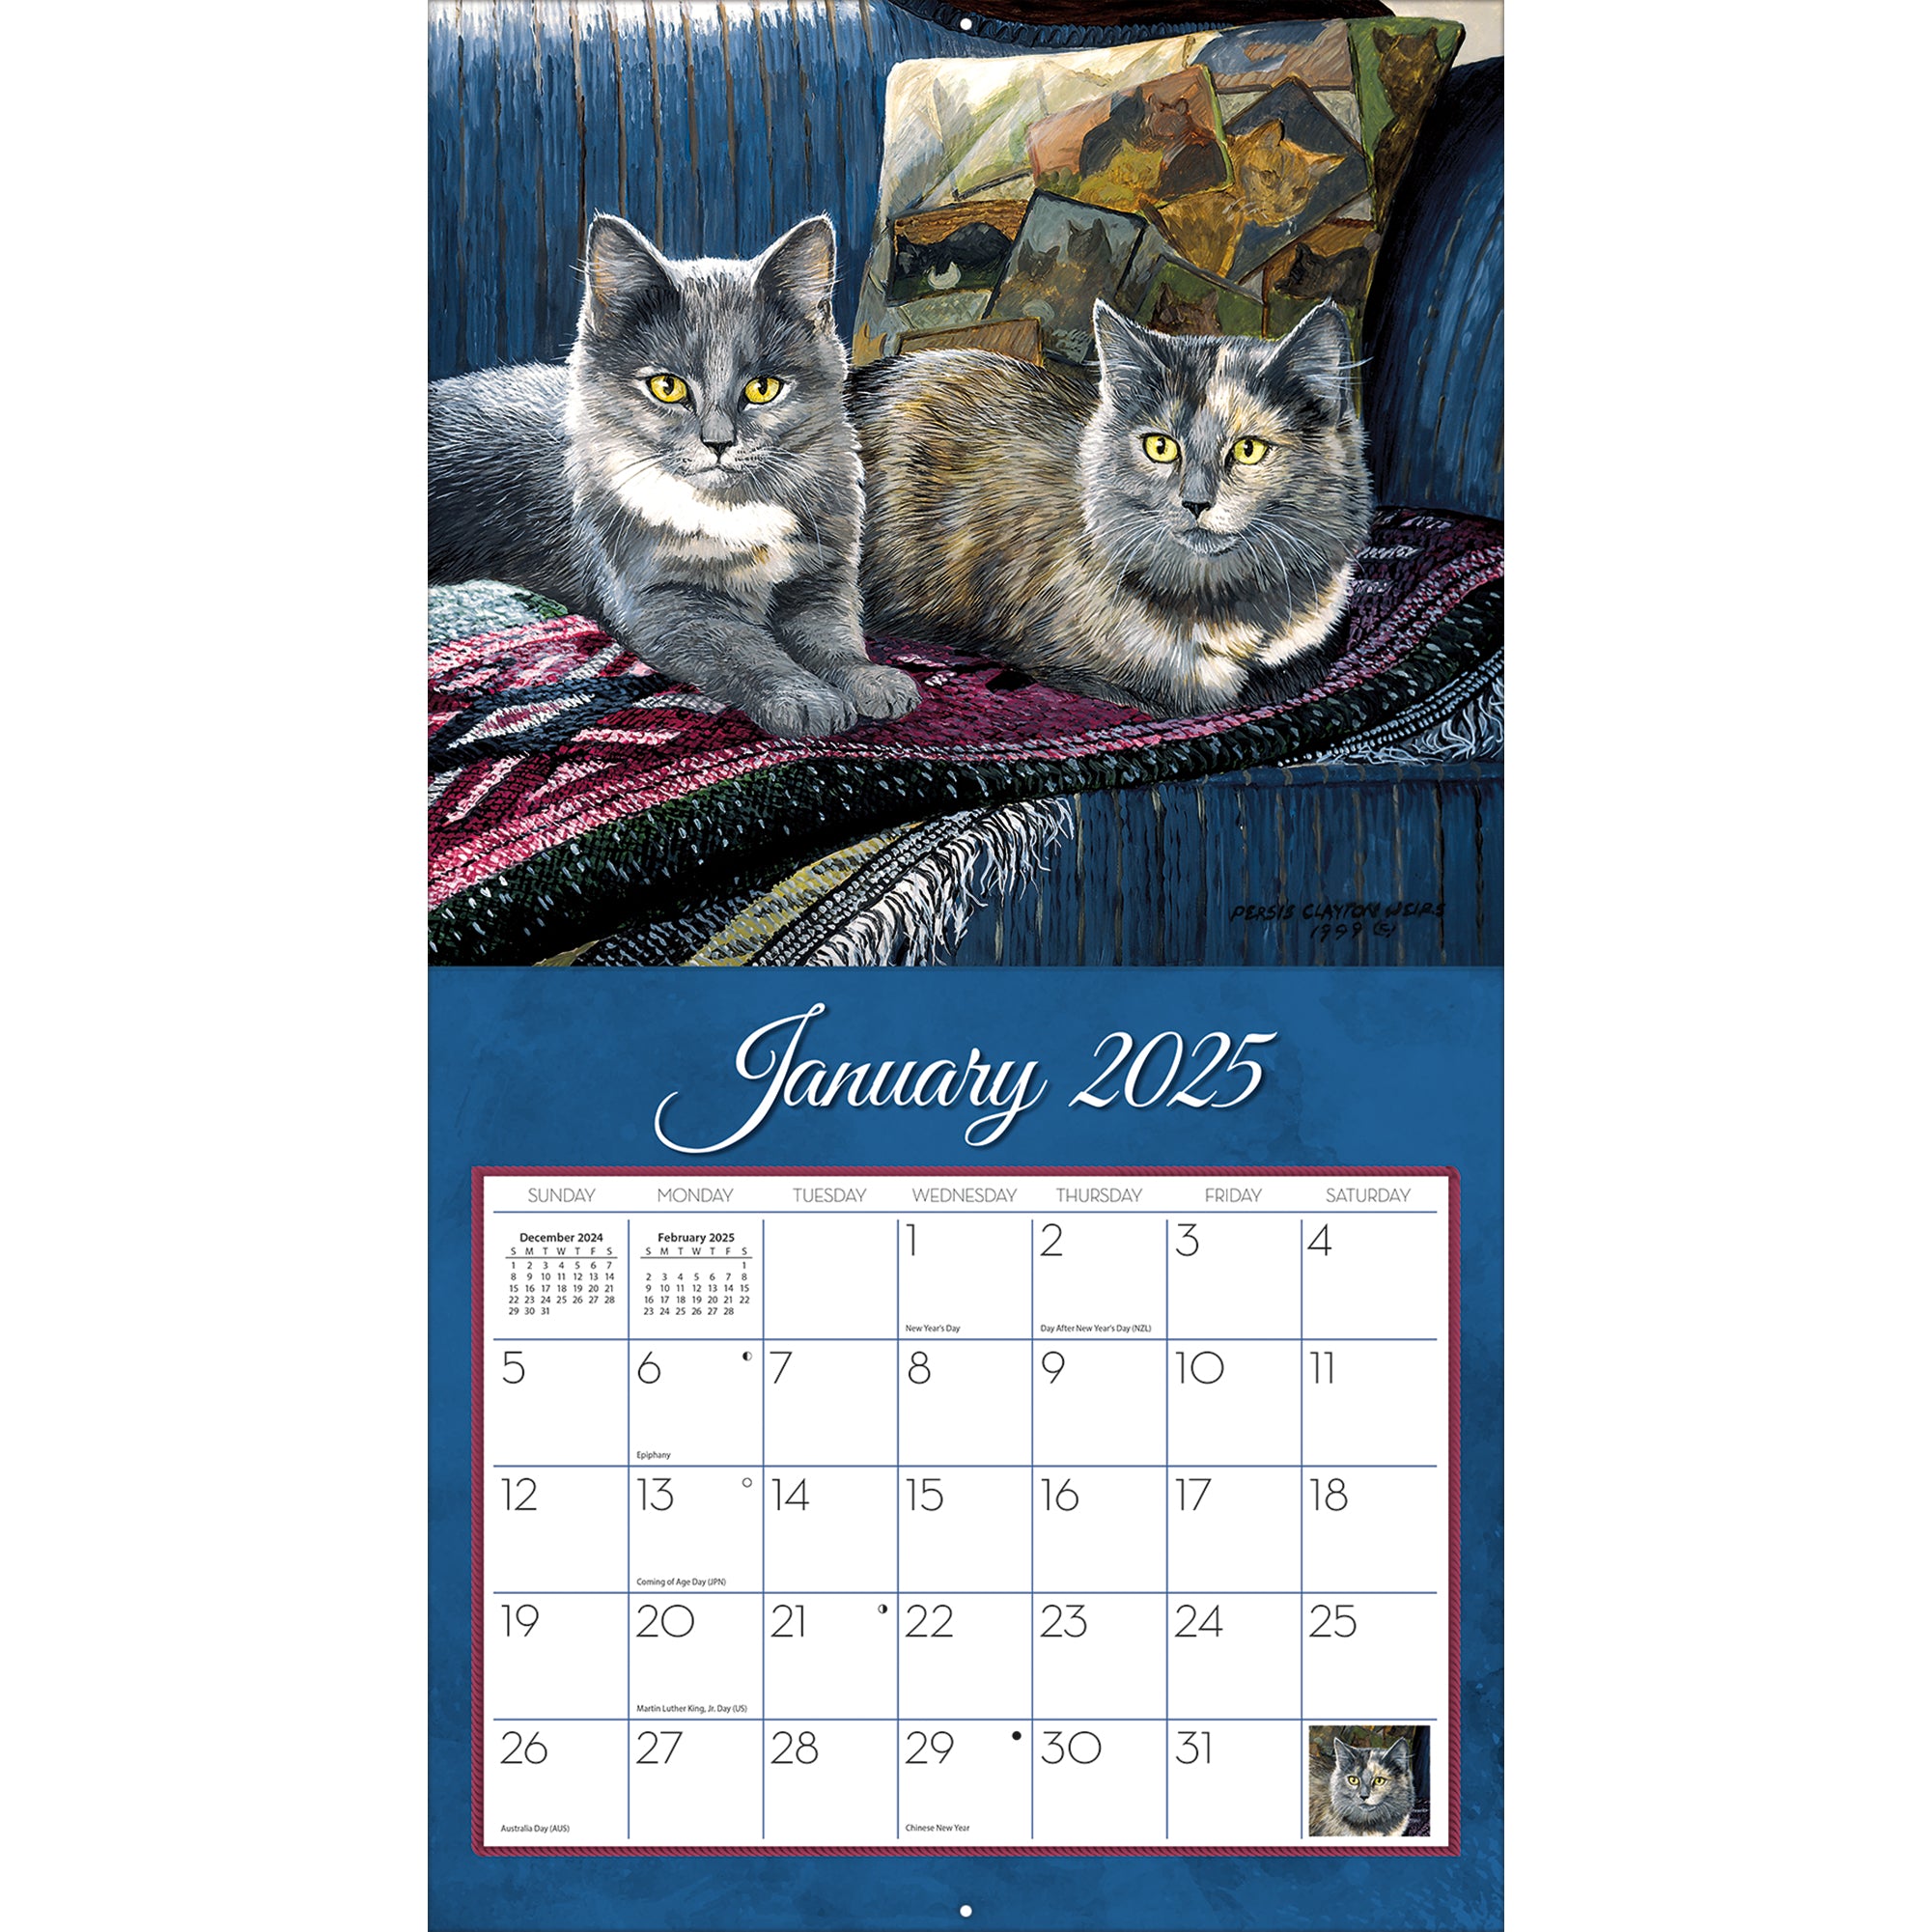 2025 LANG Love Of Cats By Persis Clayton Weirs - Deluxe Wall Calendar